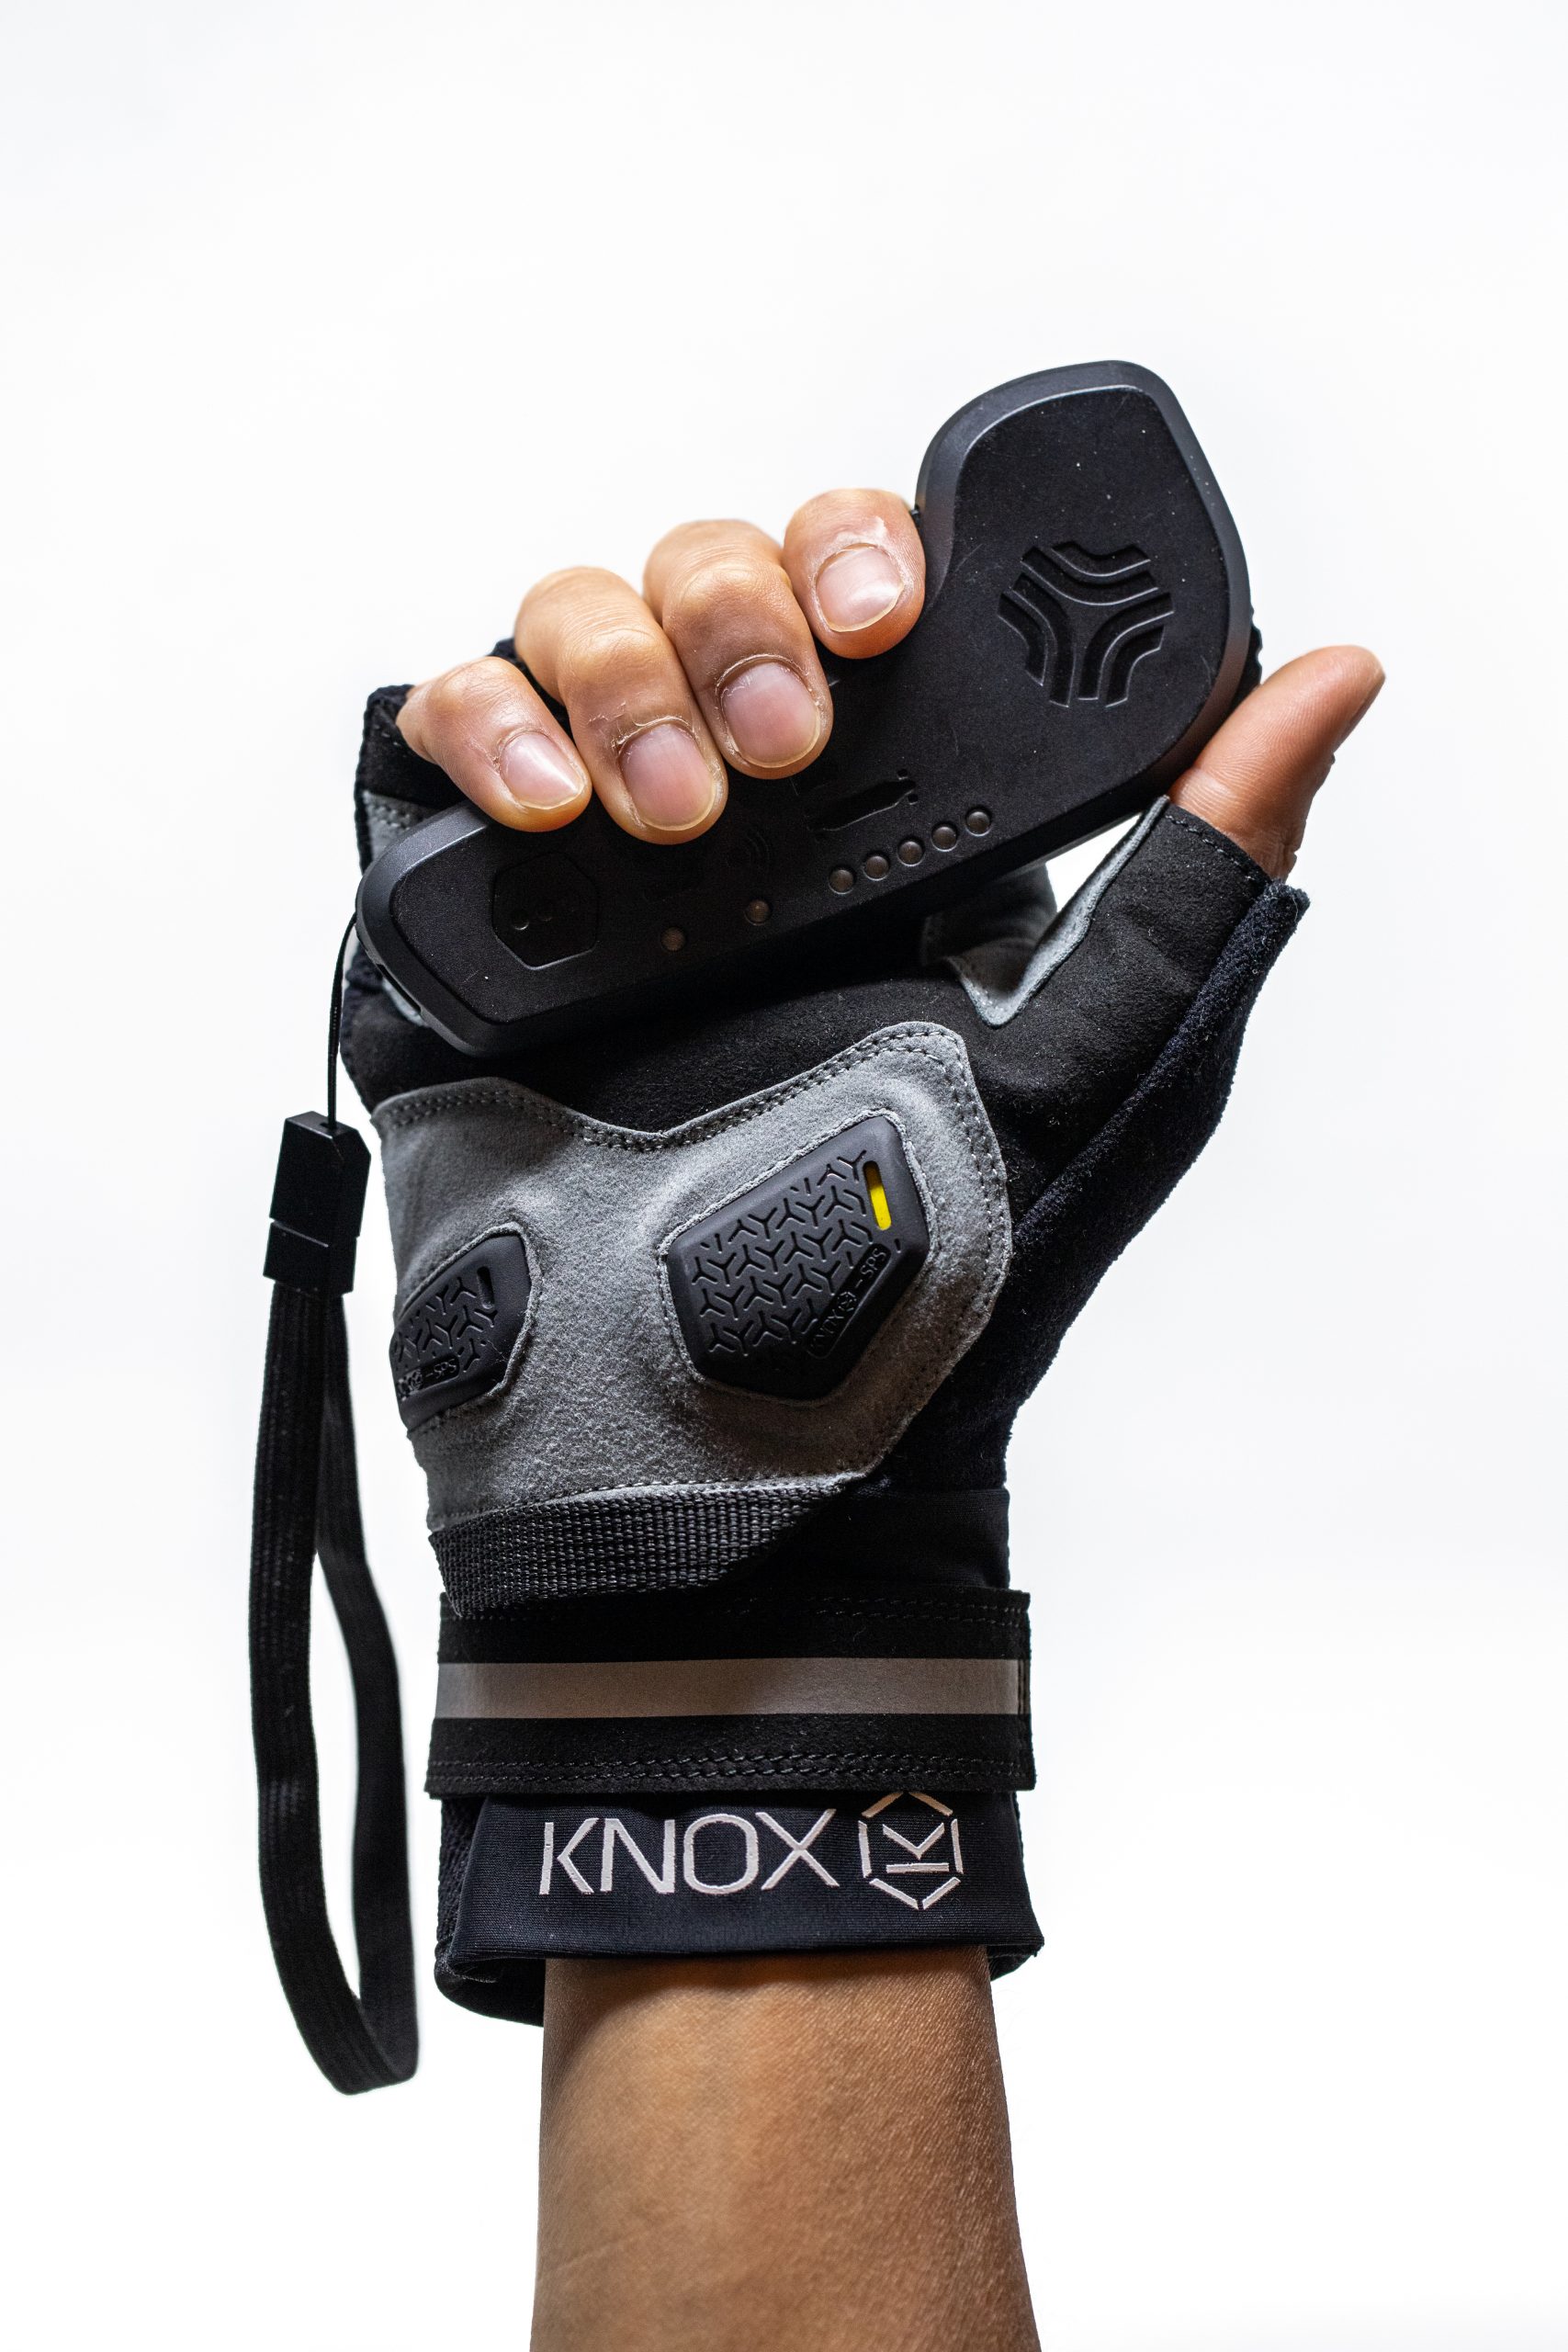 Fingerless Pro E-Skate Glove from flatland3d and Knox electric glove